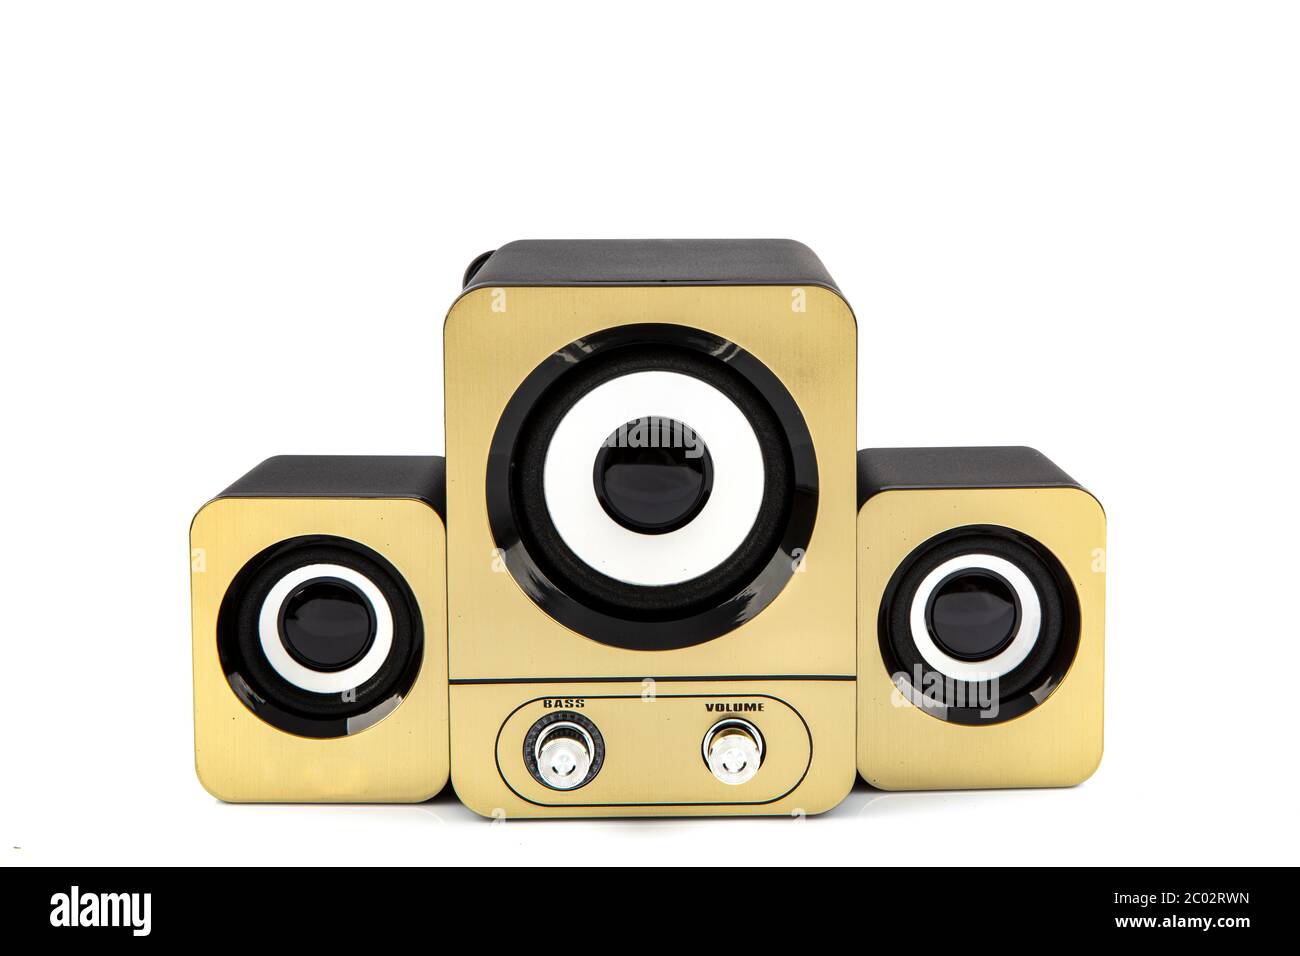 Small speakers that are usb powered. External computer speakers. Mini 2.1 USB  Speaker isolated on white background Stock Photo - Alamy